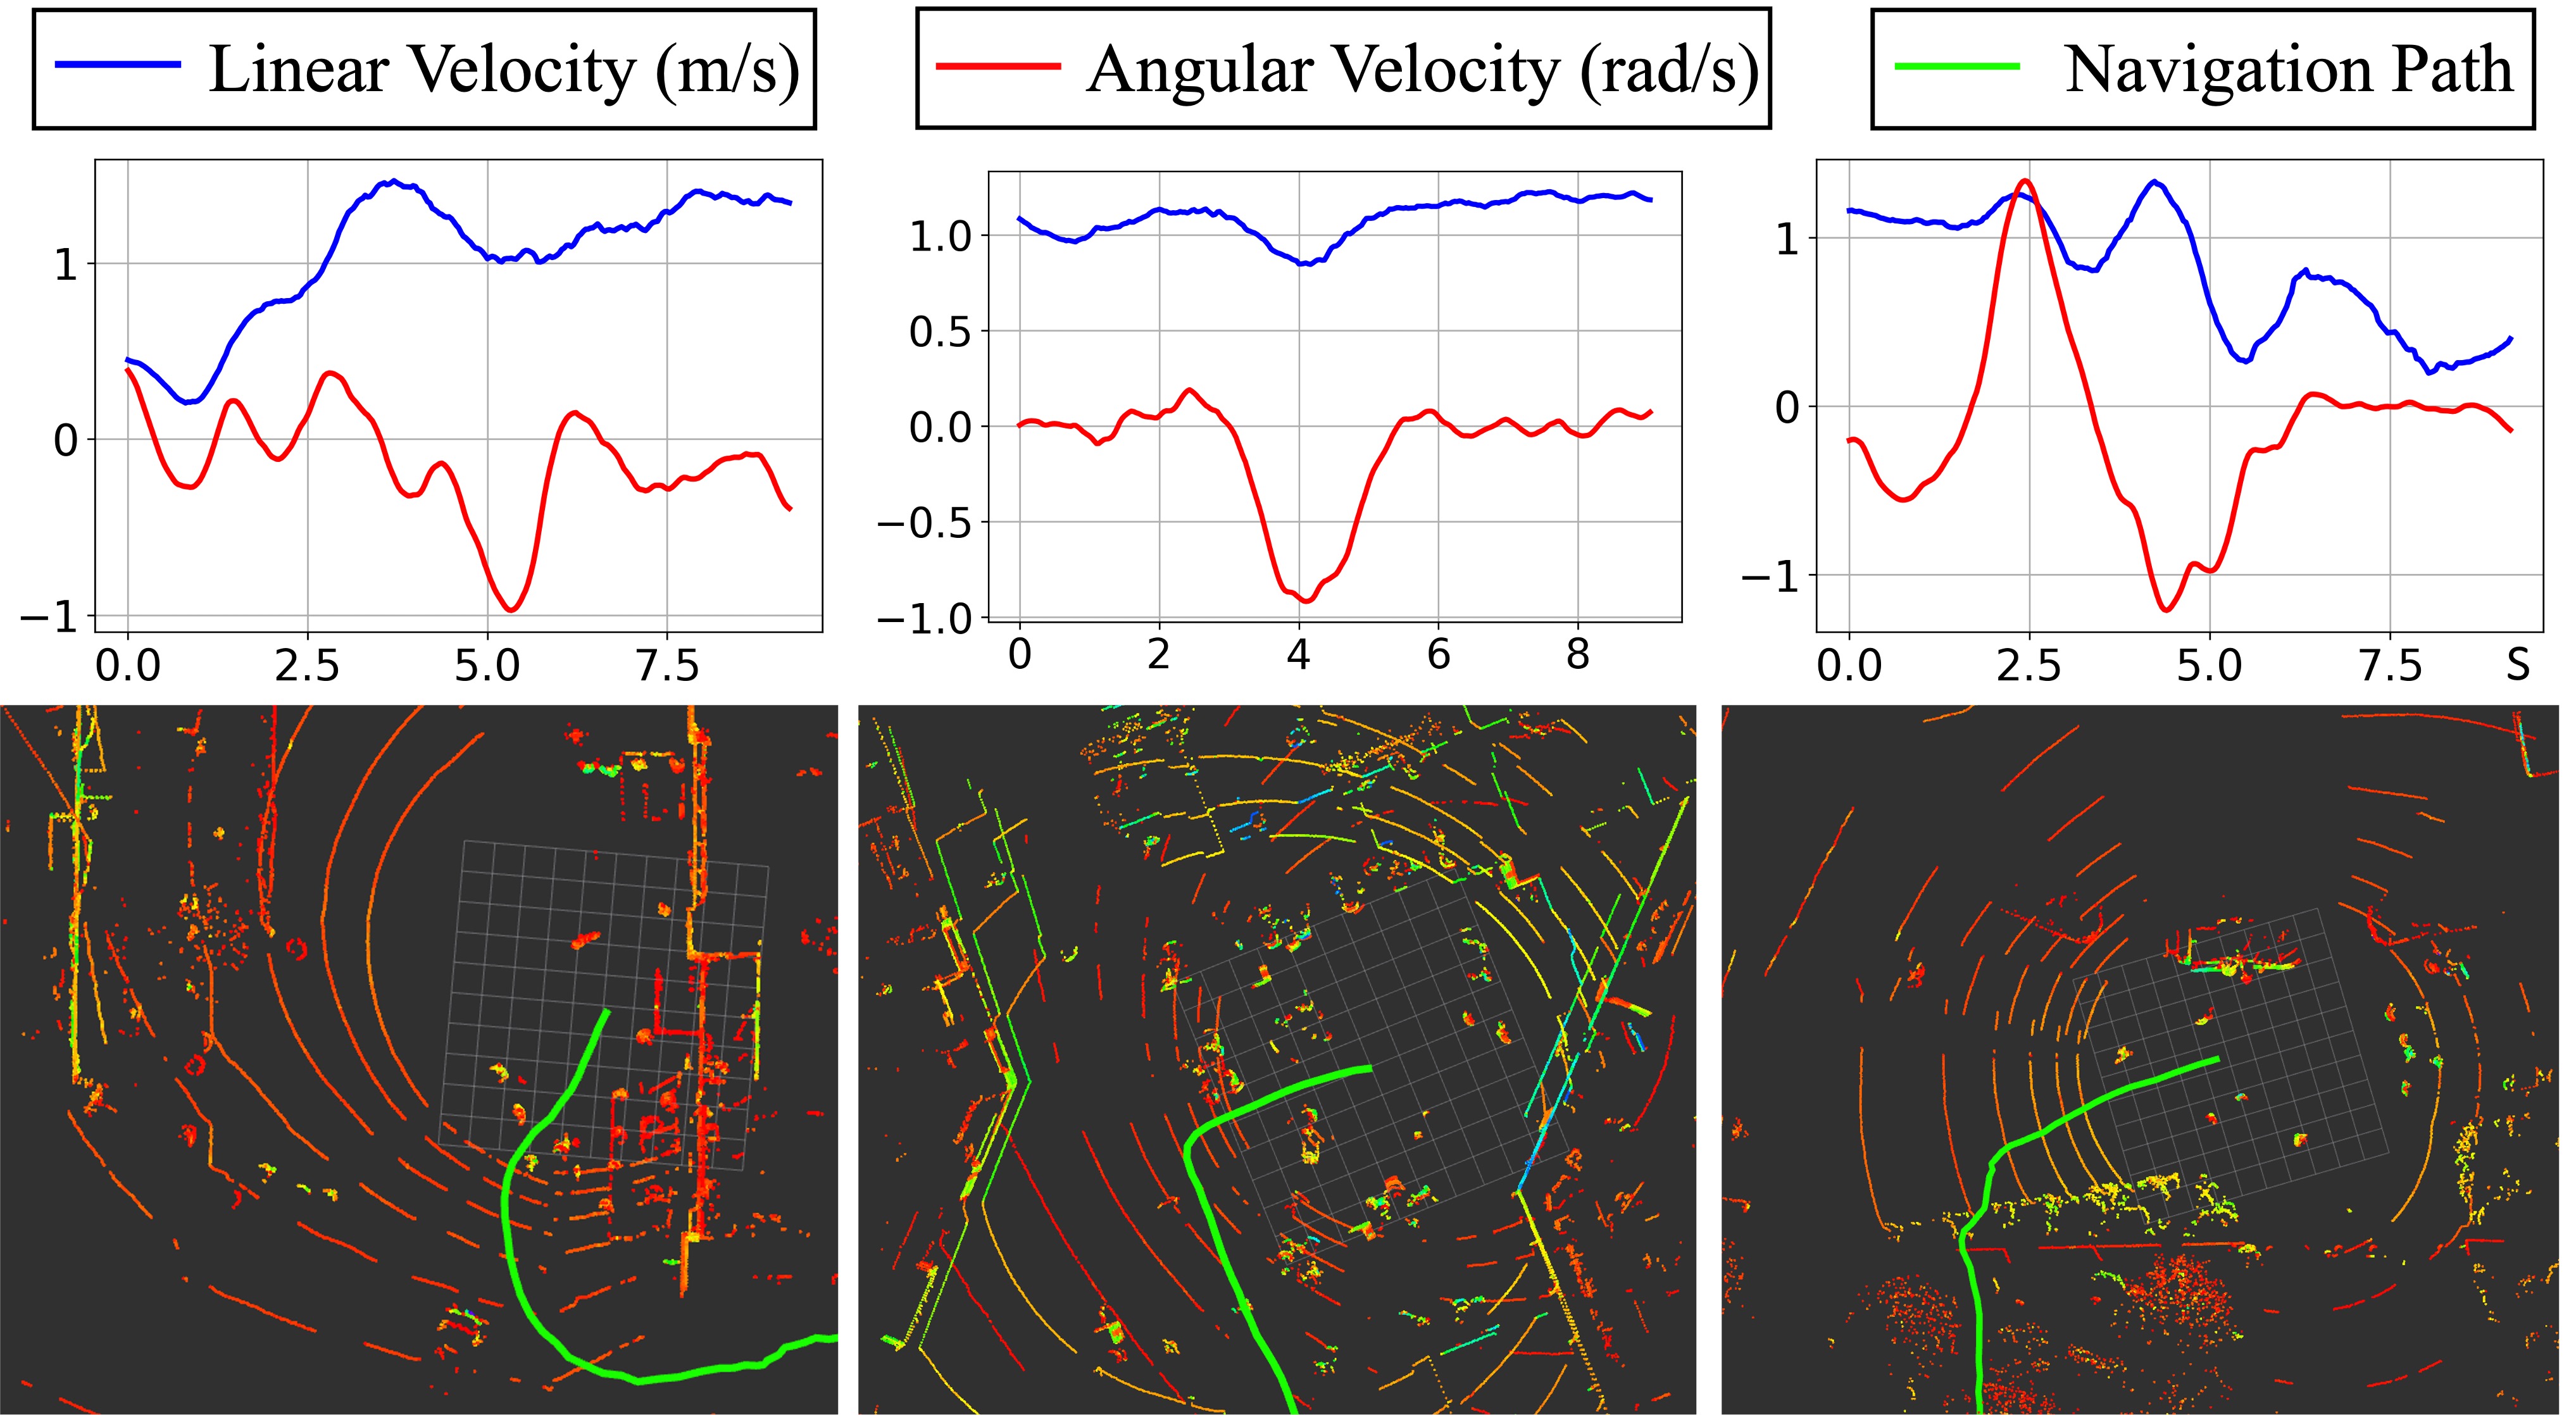 Linear and Angular Velocities and Navigation Path